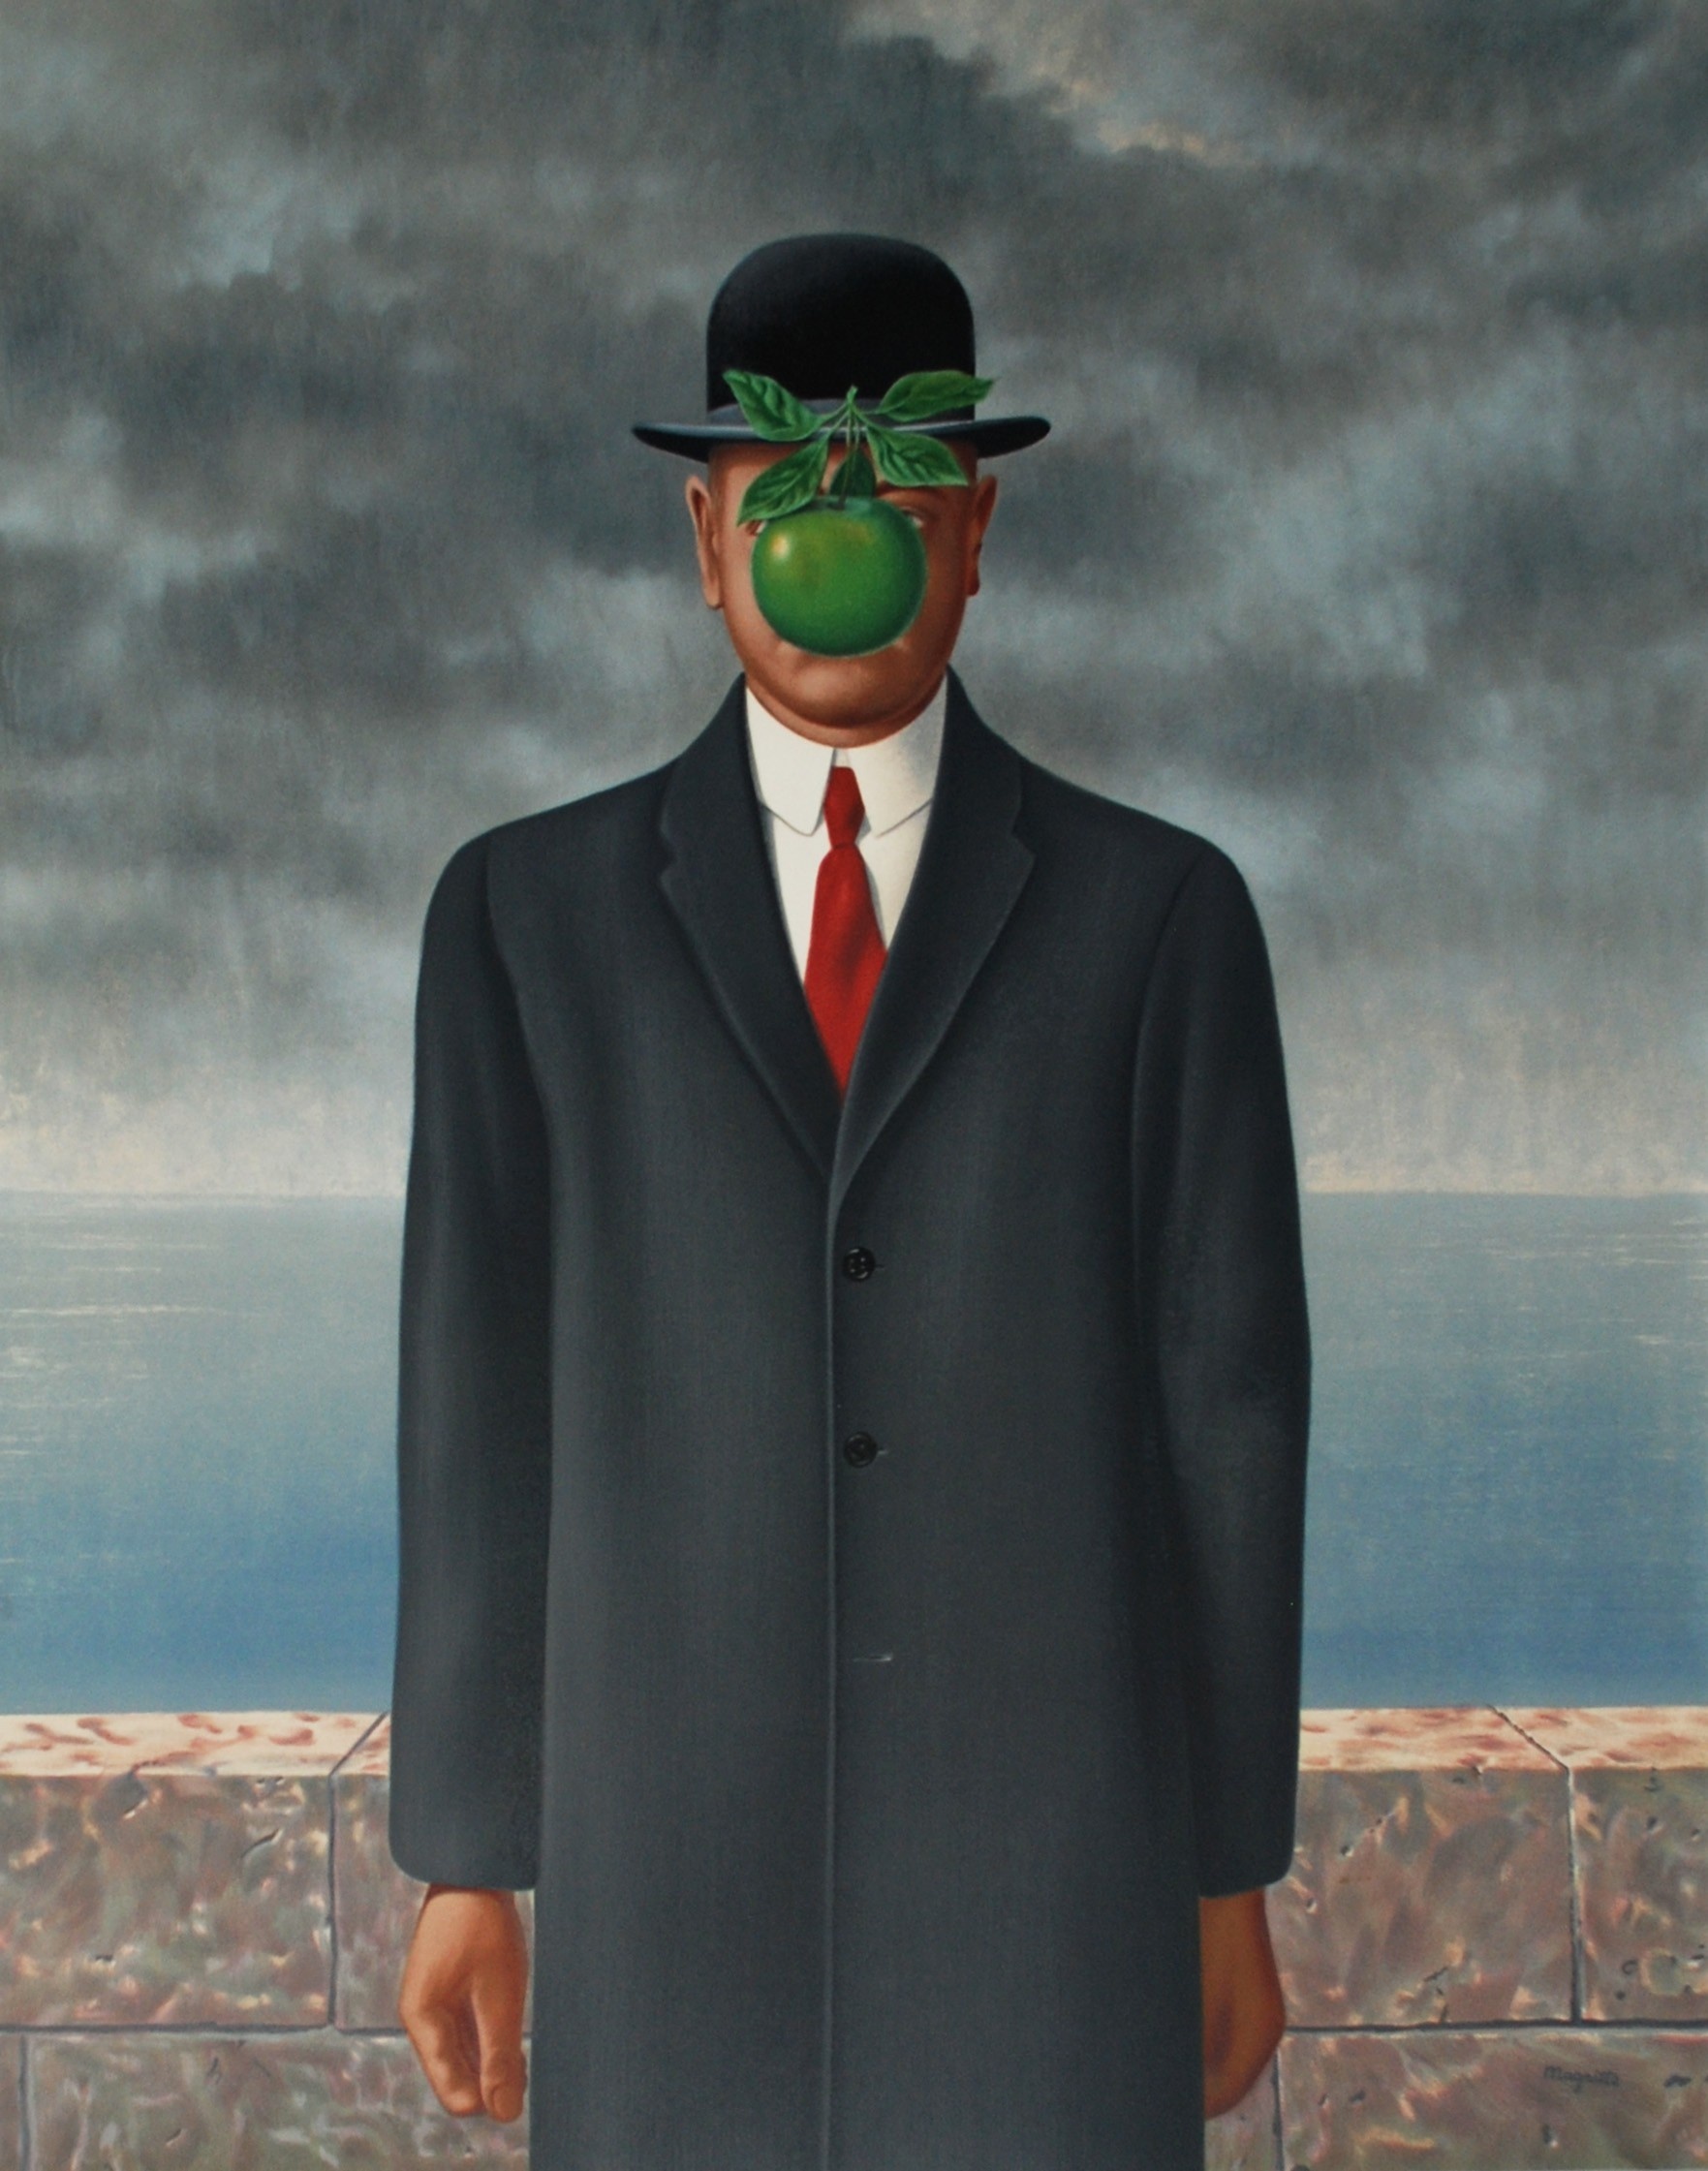 Magritte surrealism, Thought-provoking artwork, Symbolic imagery, Artistic interpretation, 1770x2250 HD Handy